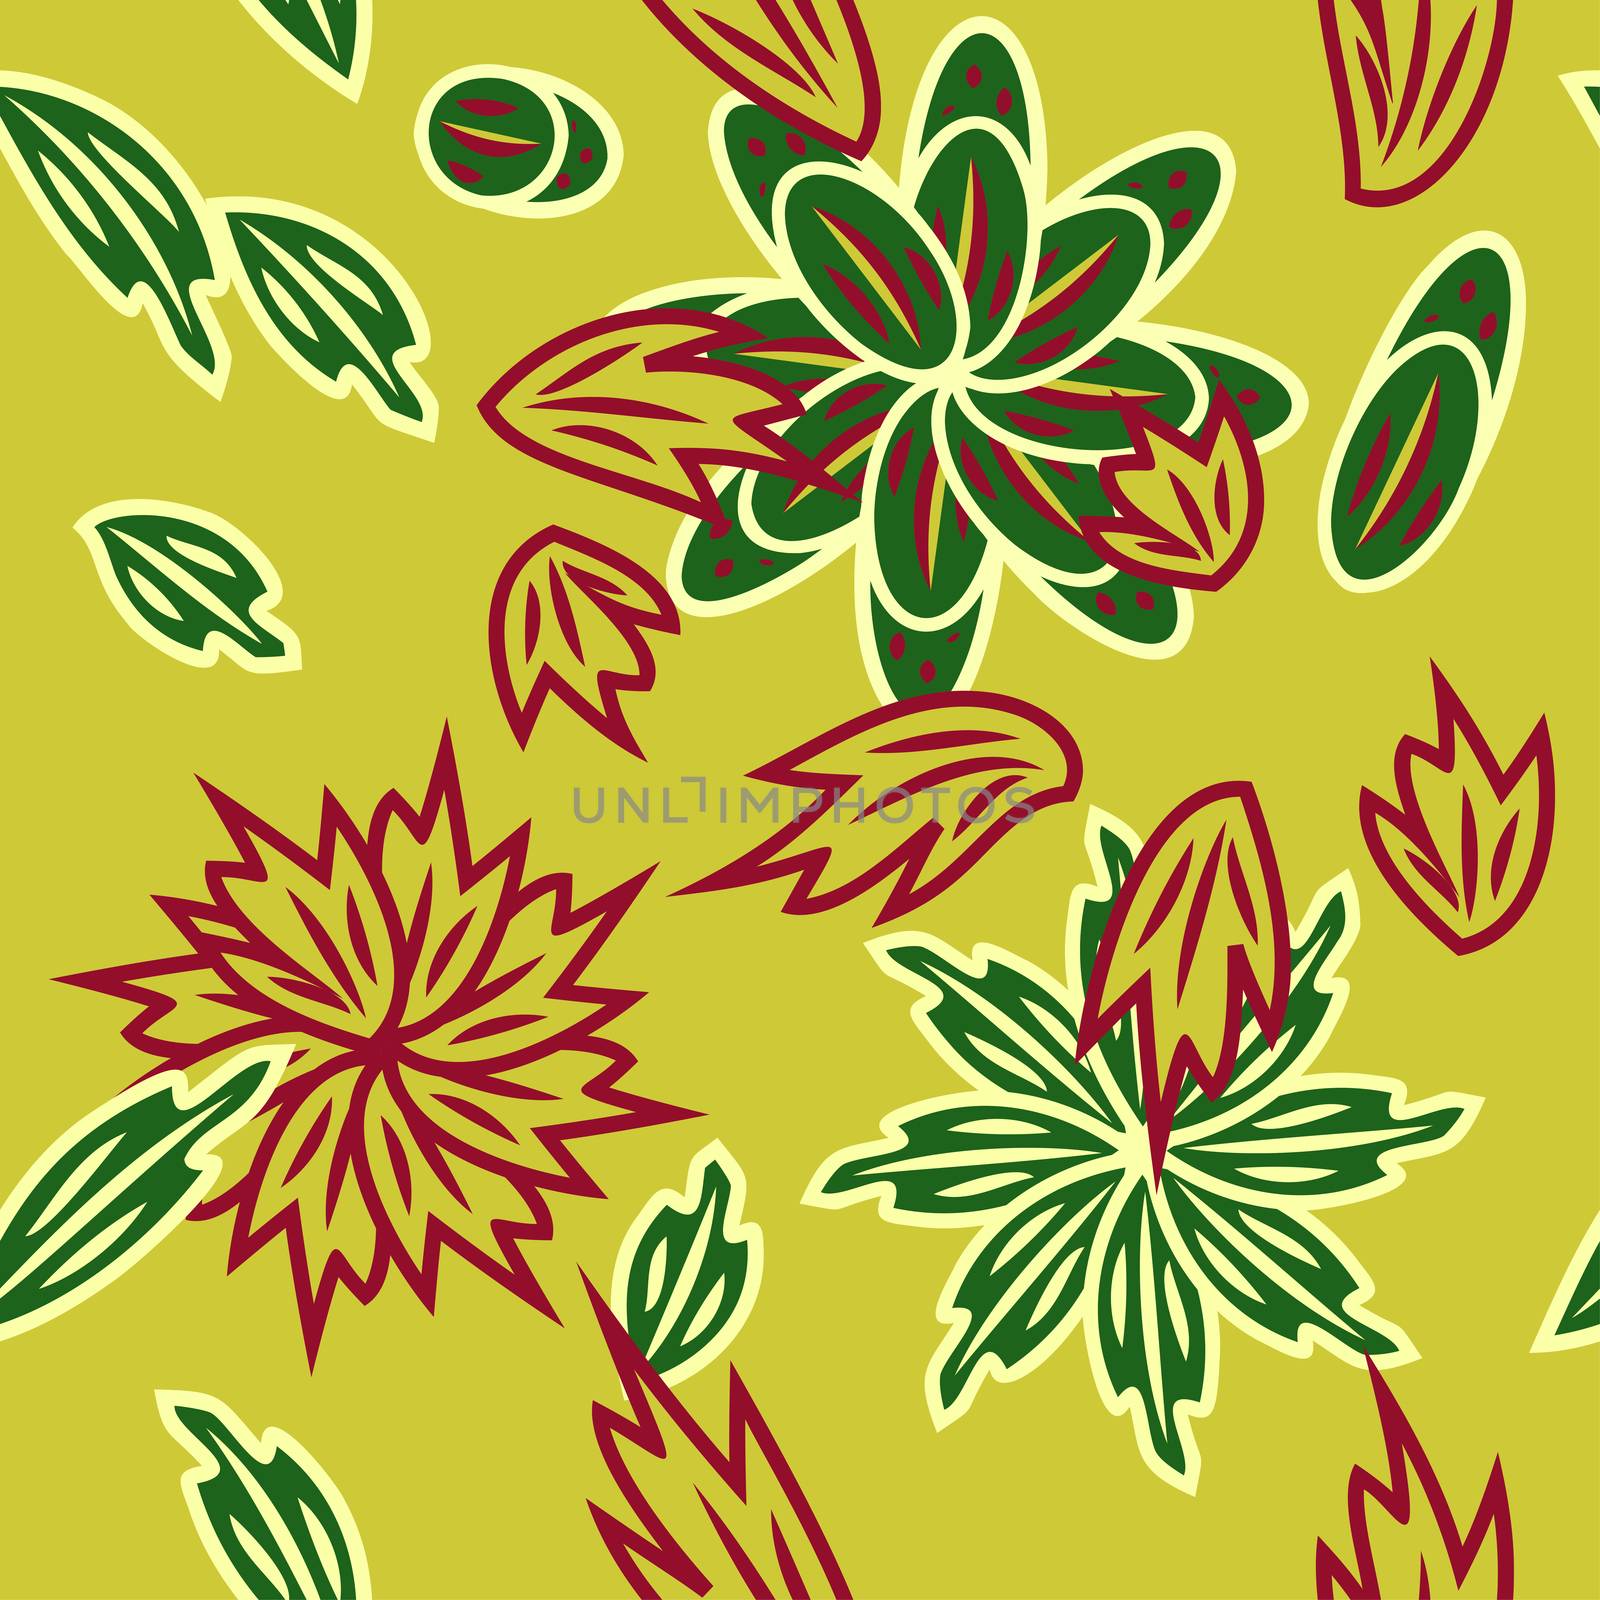 The seamless linocut style pattern with autumn leafs, tree, flowers and design elements. Hand drawn overlapping hygge scandinavian background. Textile, blog decoration, banner, poster, wrapping paper.